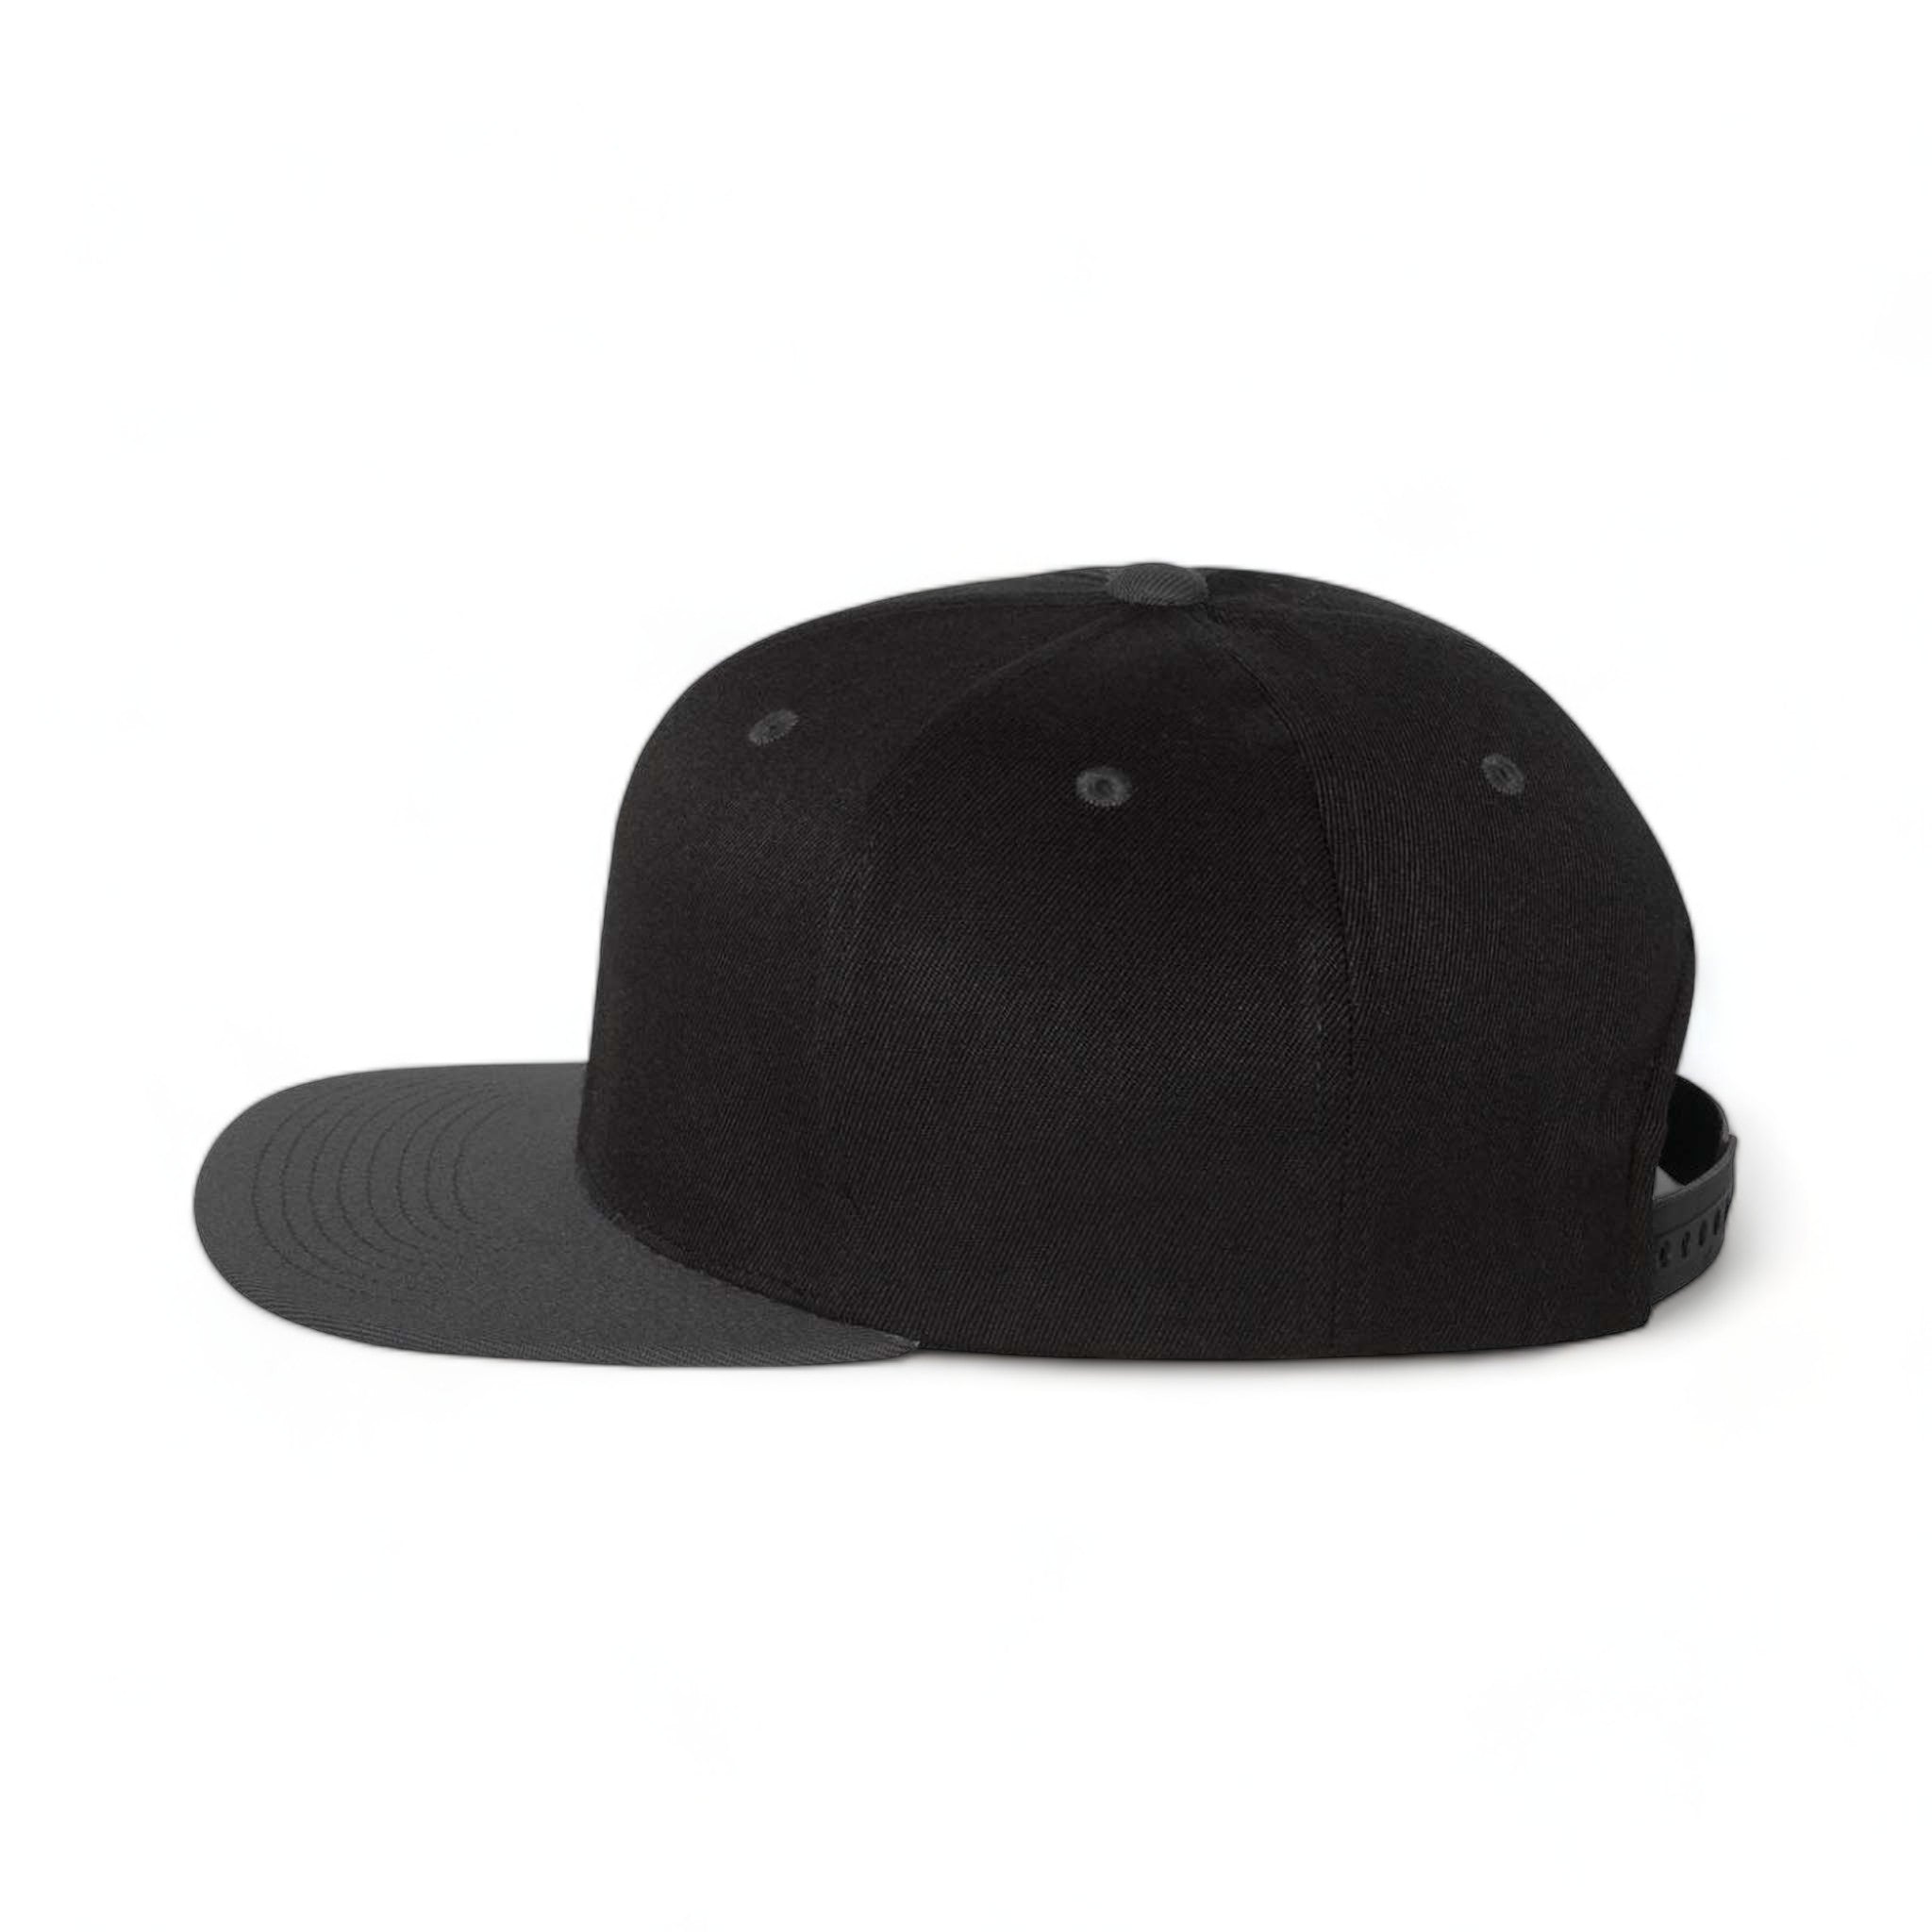 Side view of Flexfit 110F custom hat in black and grey